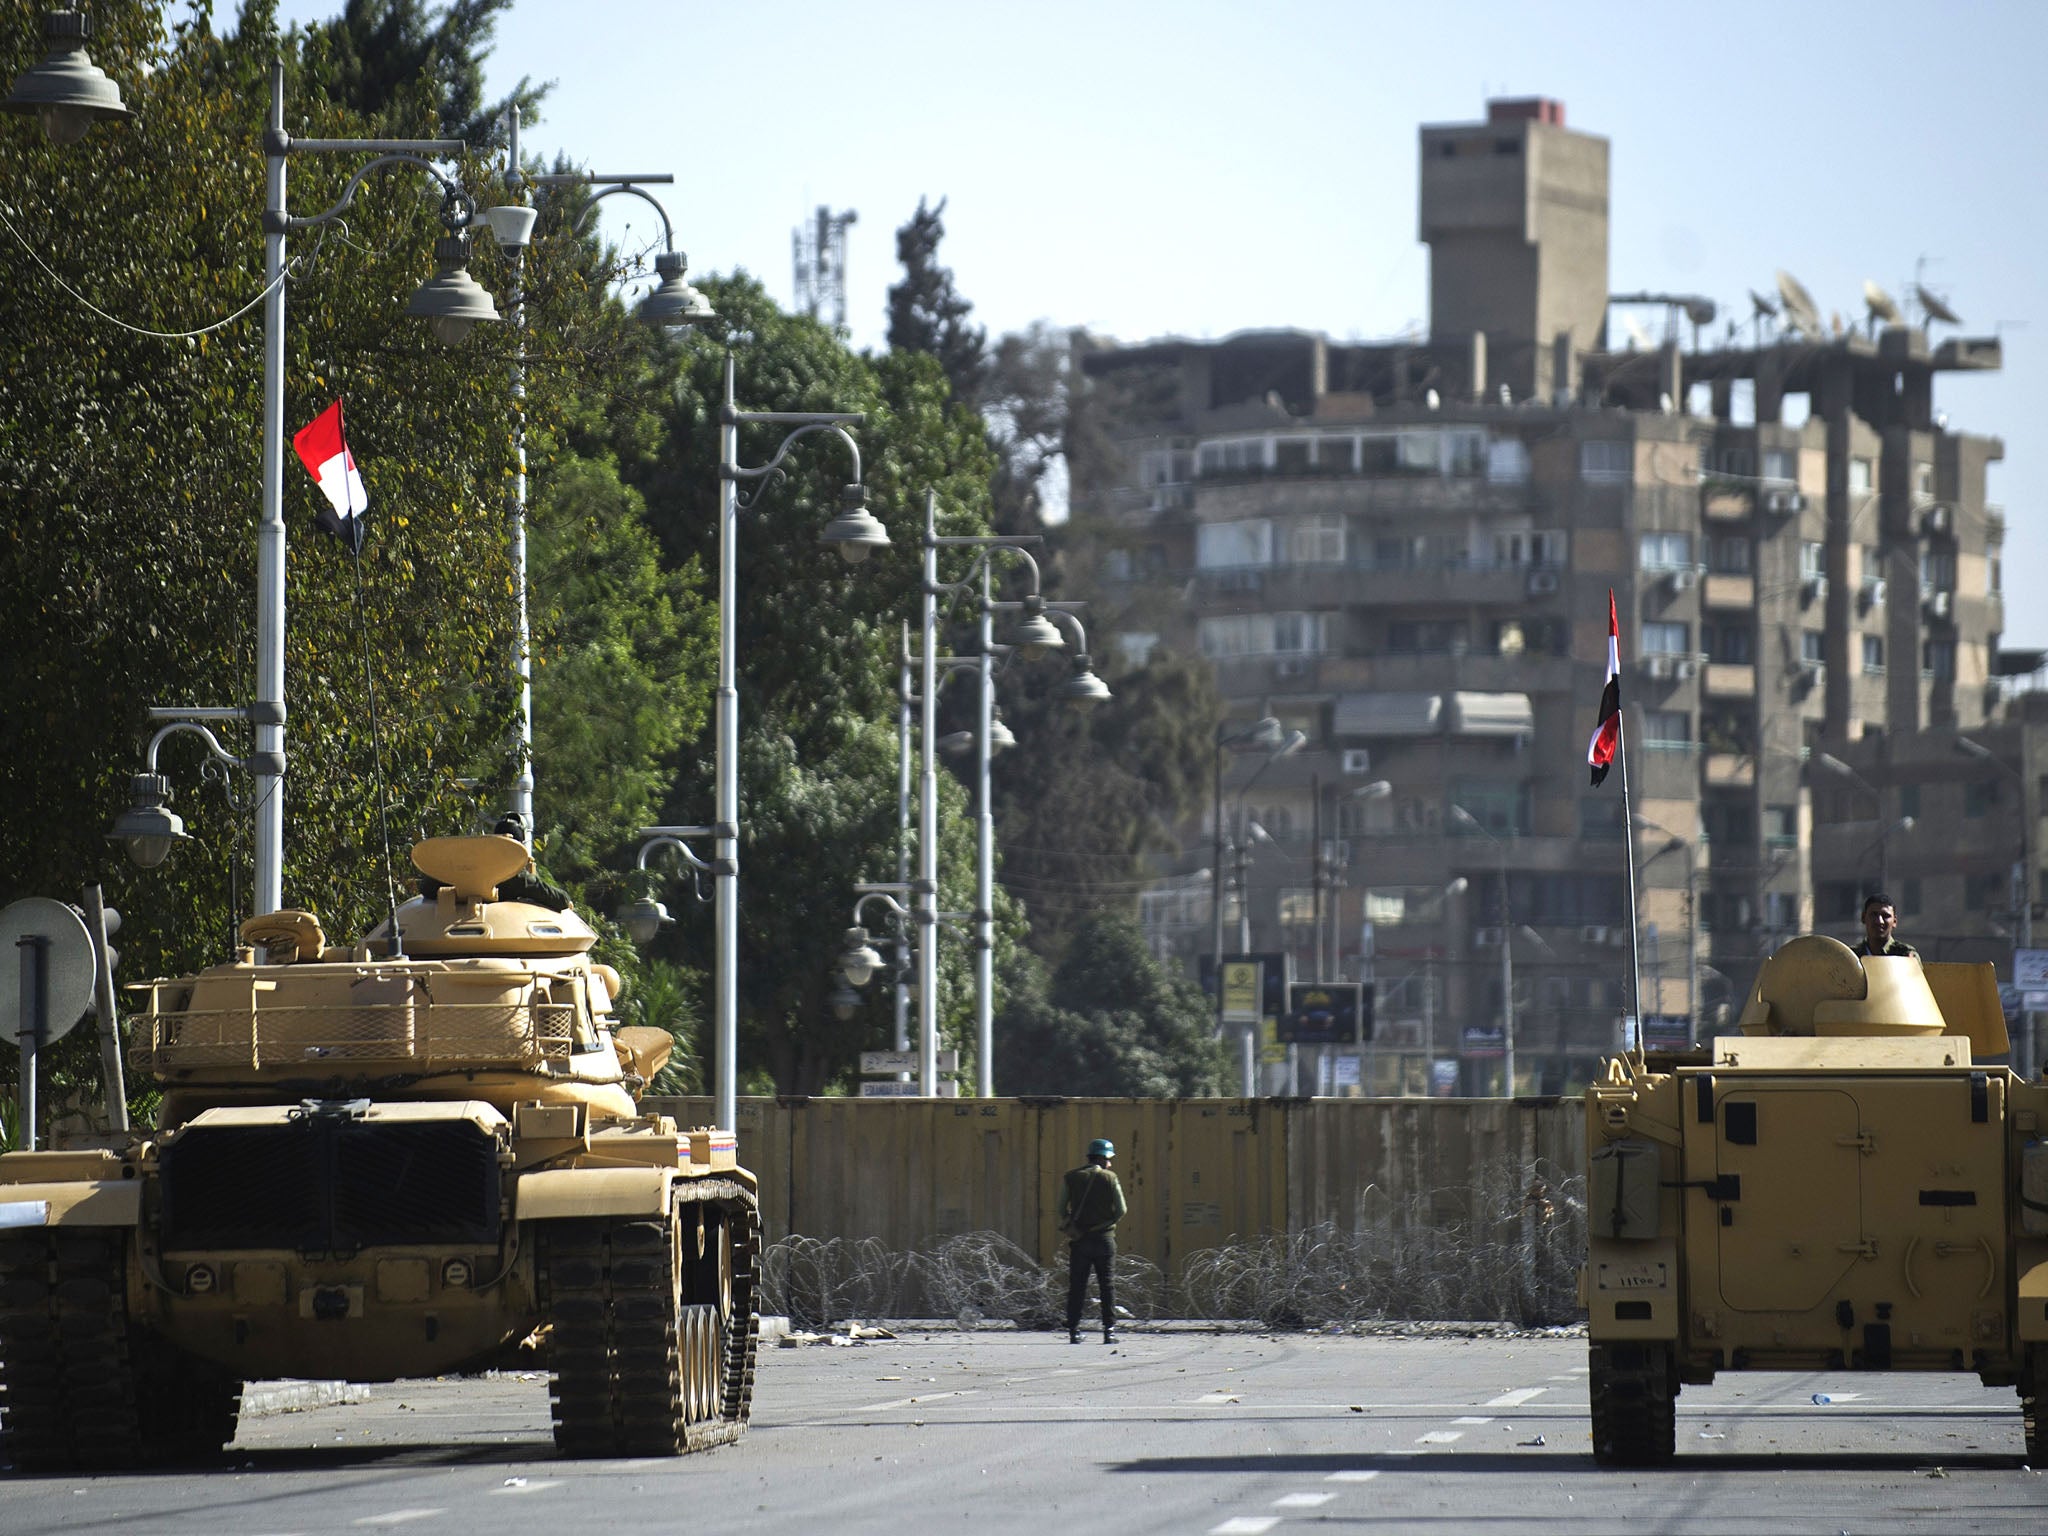 Tanks outside the presidential palace in Egypt